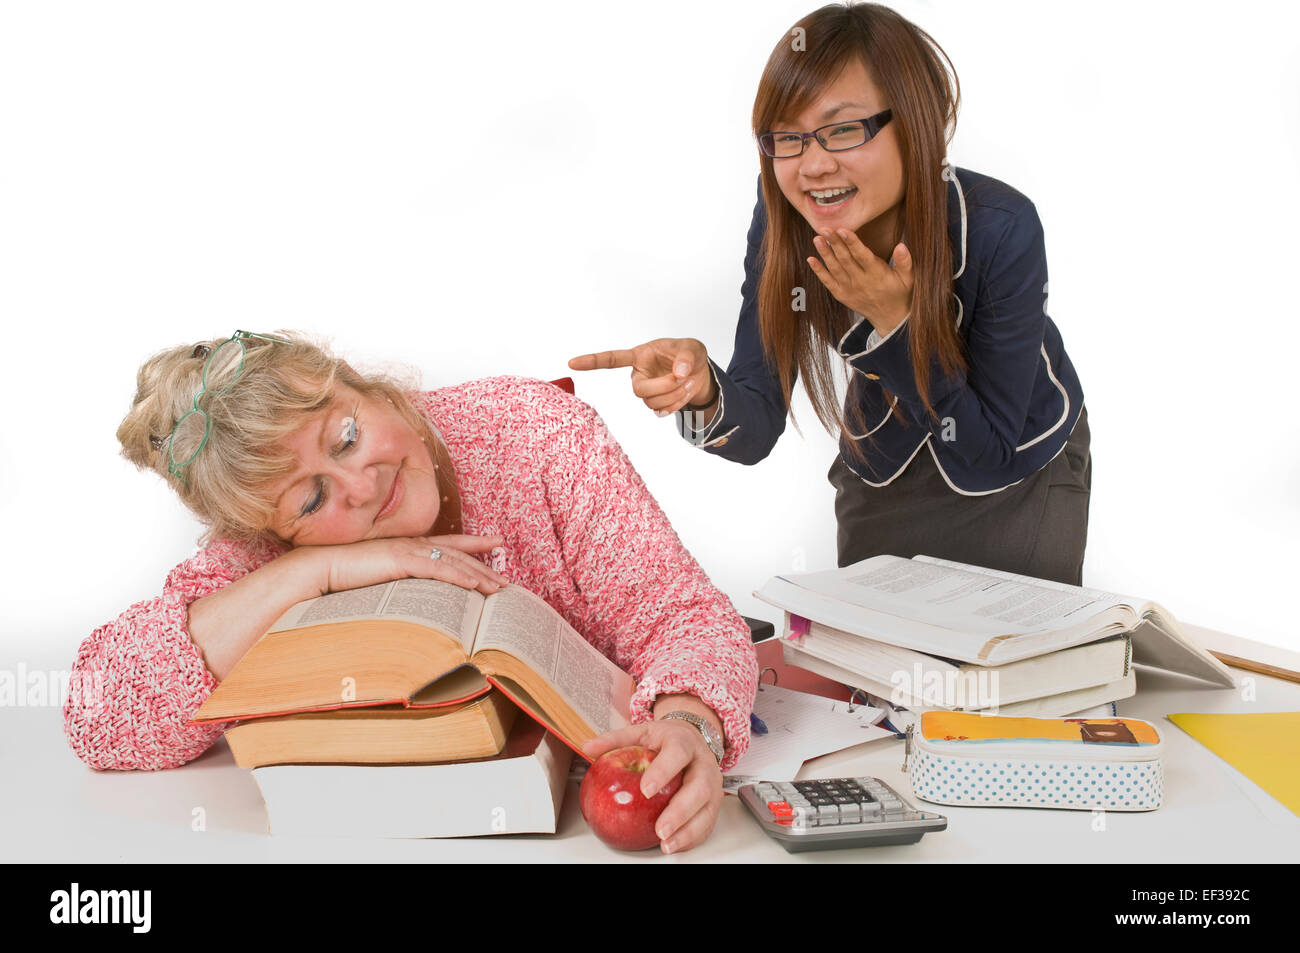 Student laughing at sleeping teacher Stock Photo